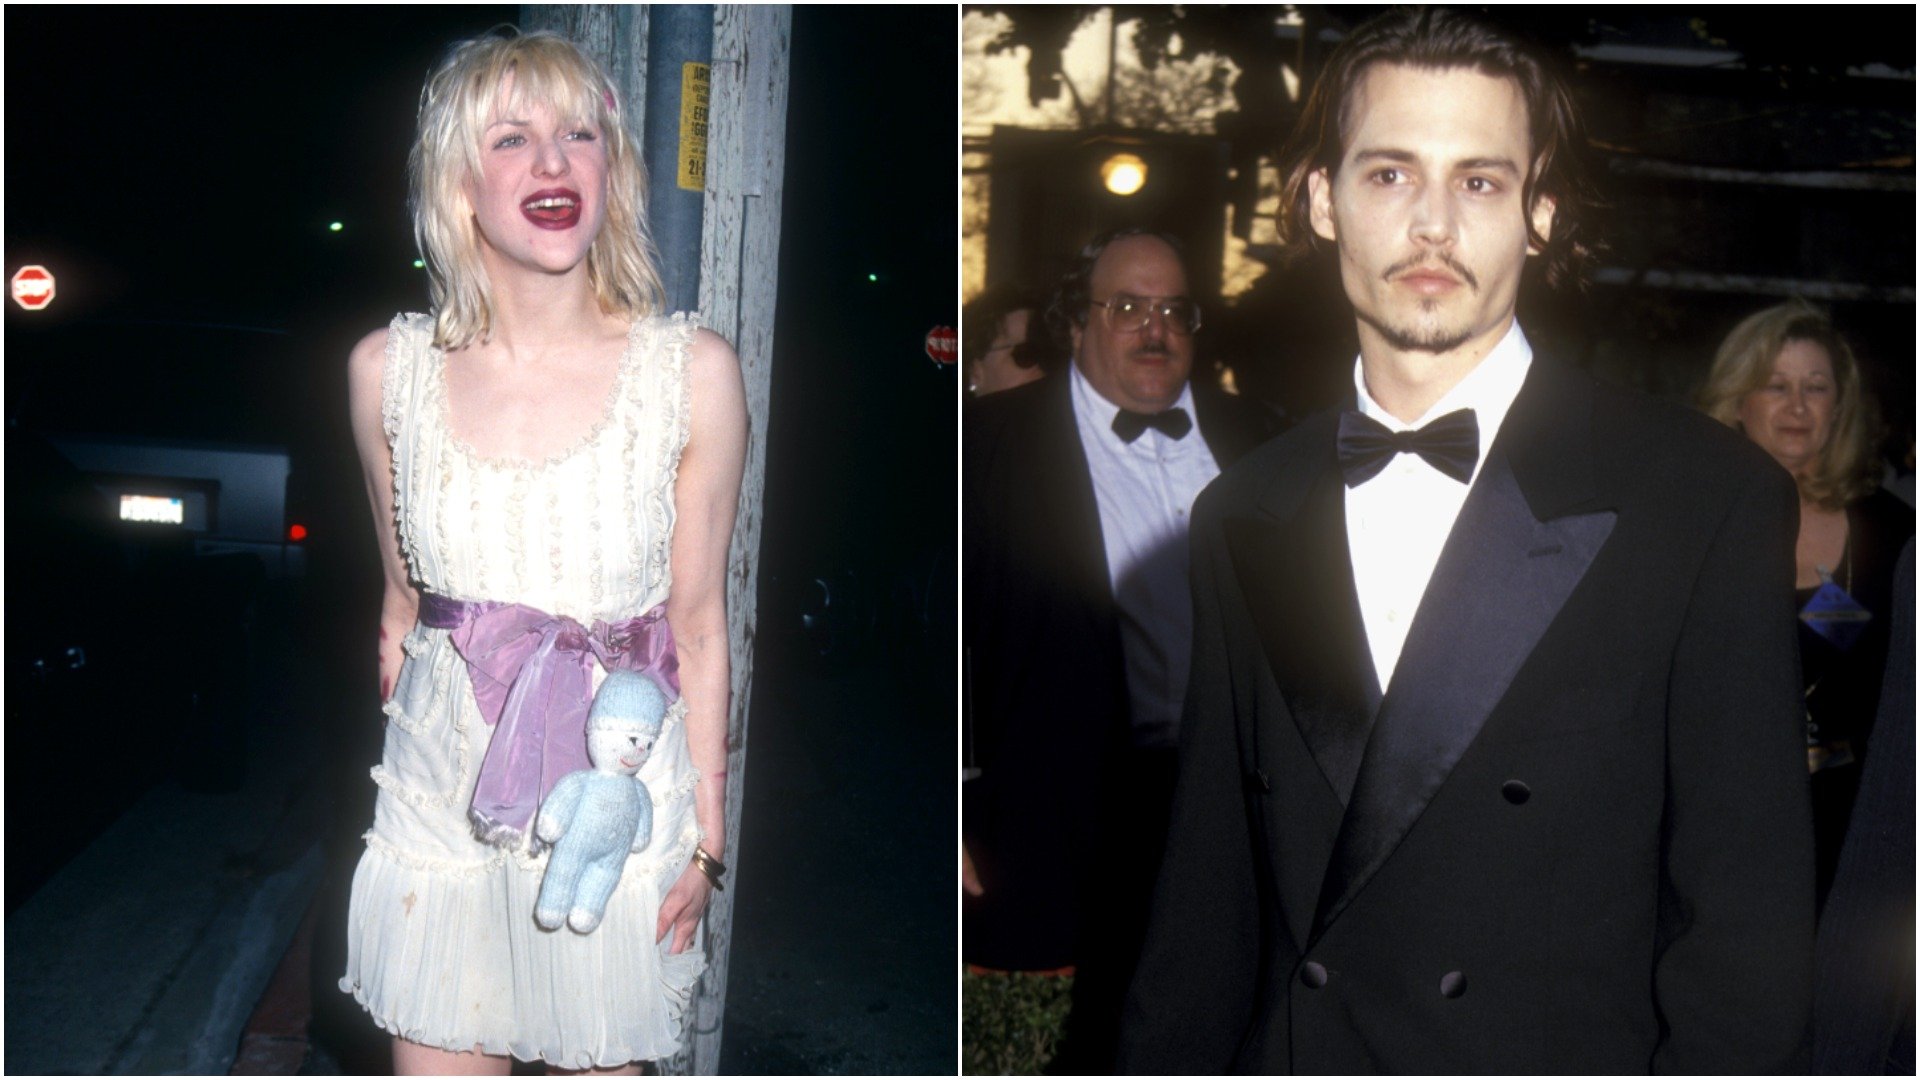 Courtney Love attended a premiere in 1994. At another event, Johnny Depp attended a 1994 premiere. 